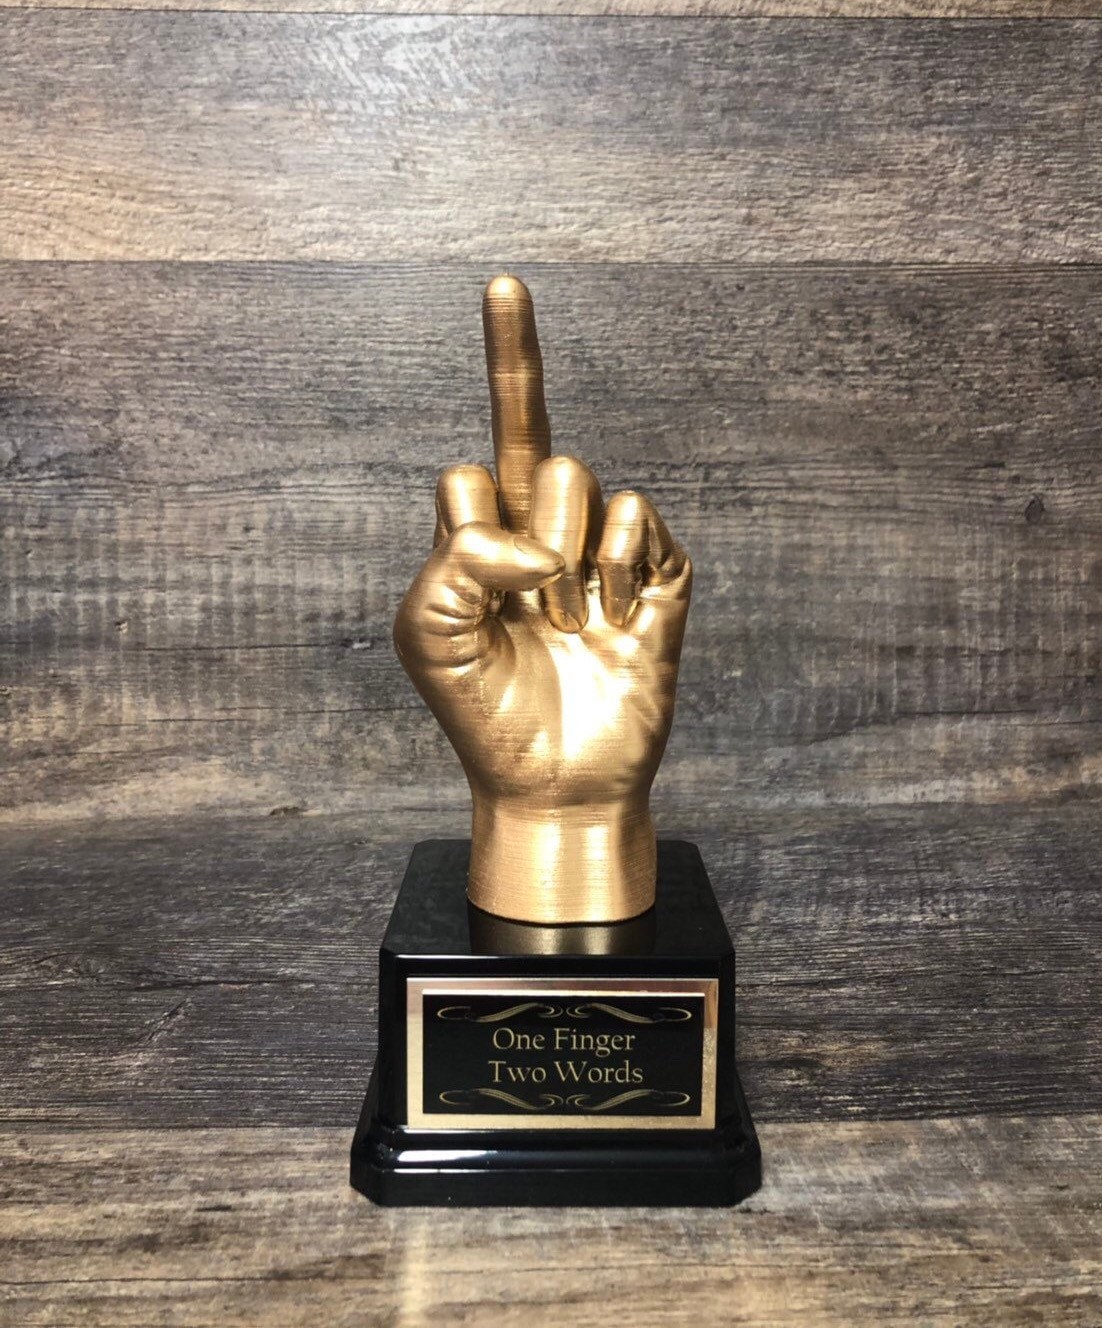 Funny Trophy You're #1 Middle Finger Gag Gift Adult Humor Friend Birthday Gift Flipping You The Bird F*ck You Trophy One Finger Two Words